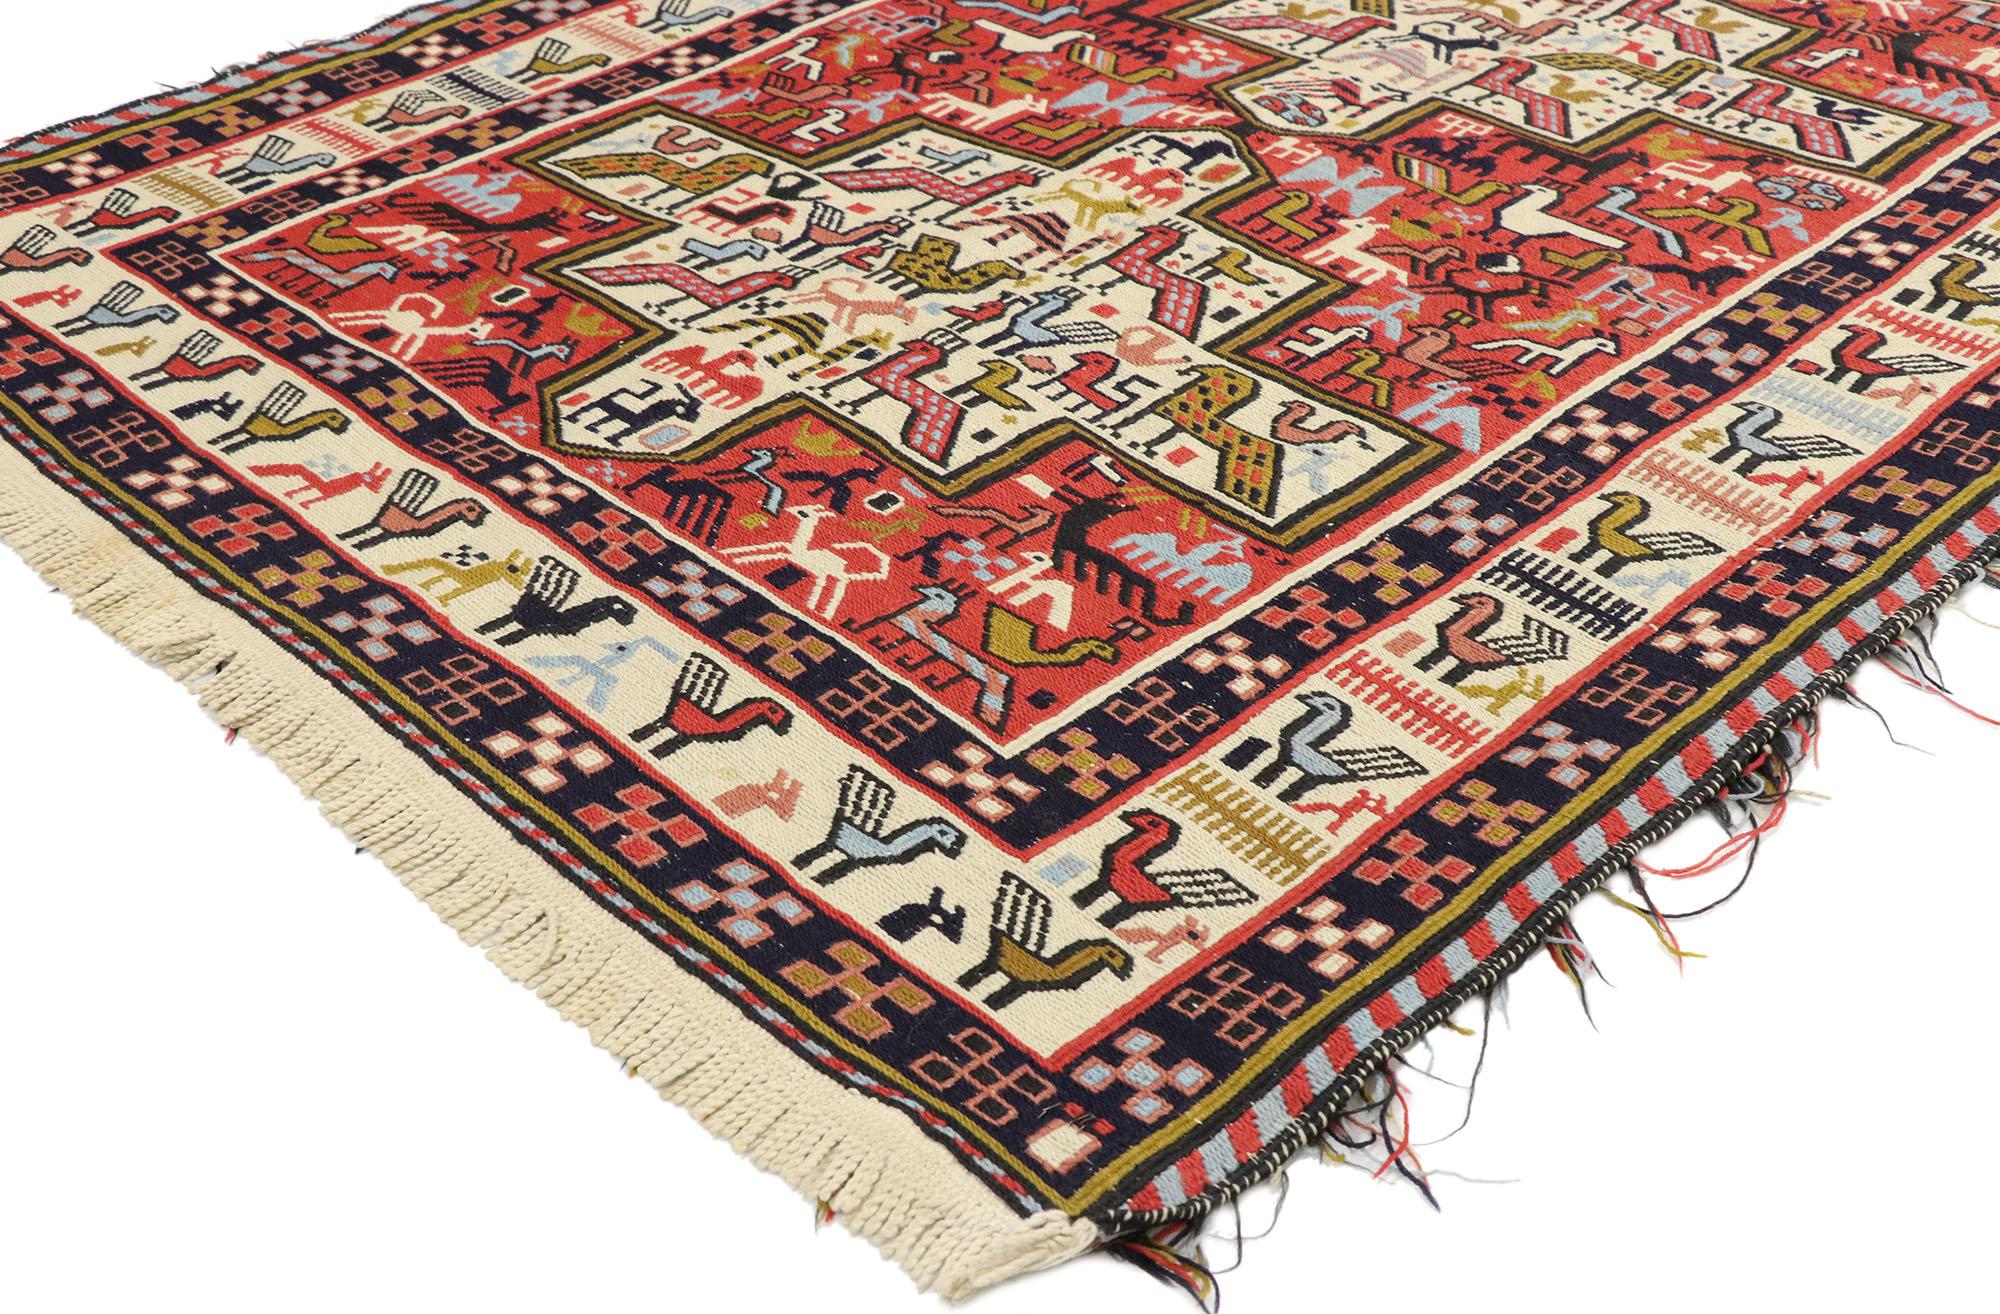 71030, vintage Persian Soumak Kilim rug with Caucasian Nomadic Tribal style. Masculine and geometric, this handwoven wool vintage Persian Soumak Kilim rug features two large-scale medallions patterned inside and surrounded by rectilinear animal